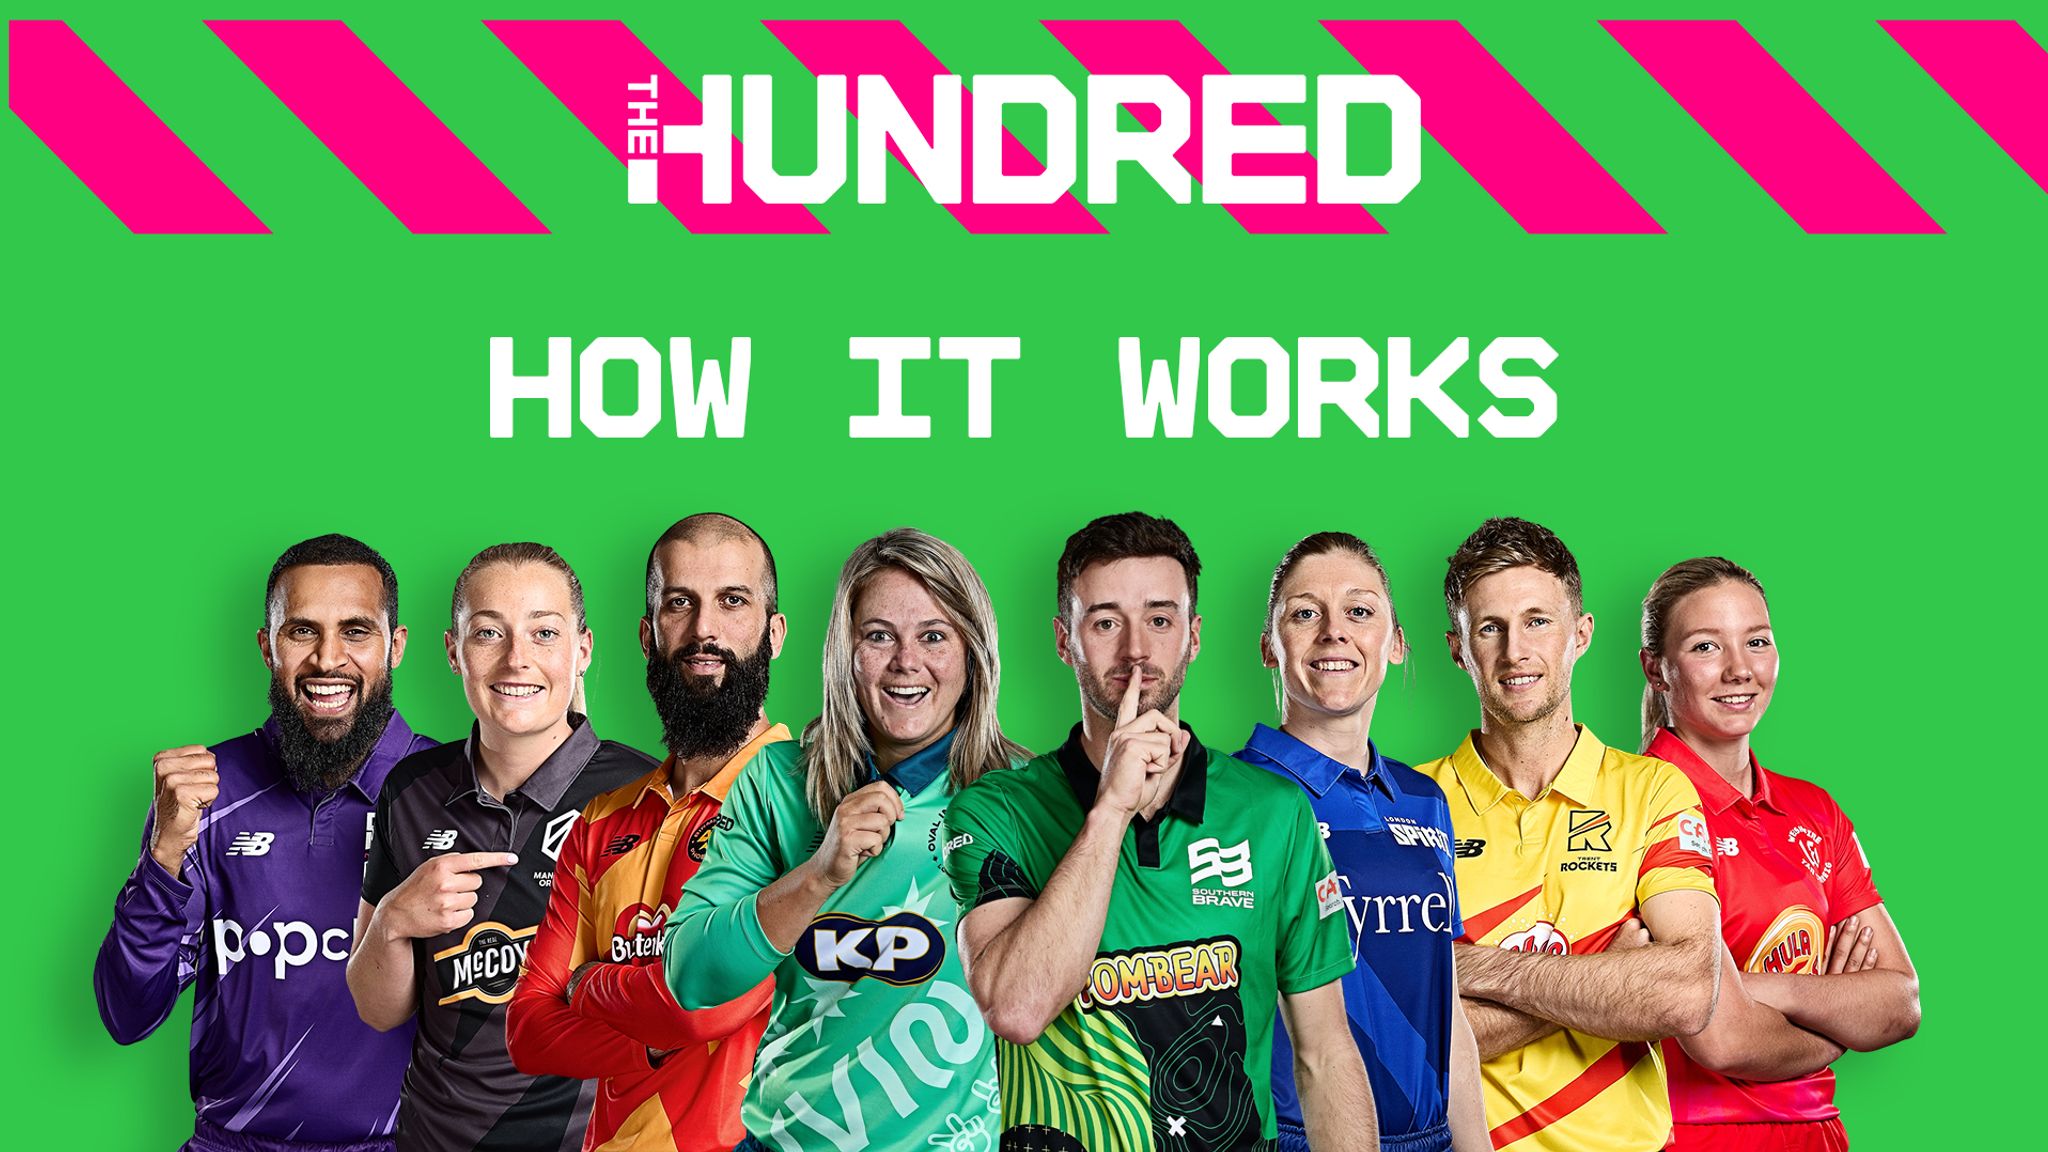 The Hundred How does the tournament work? What were the top stats from